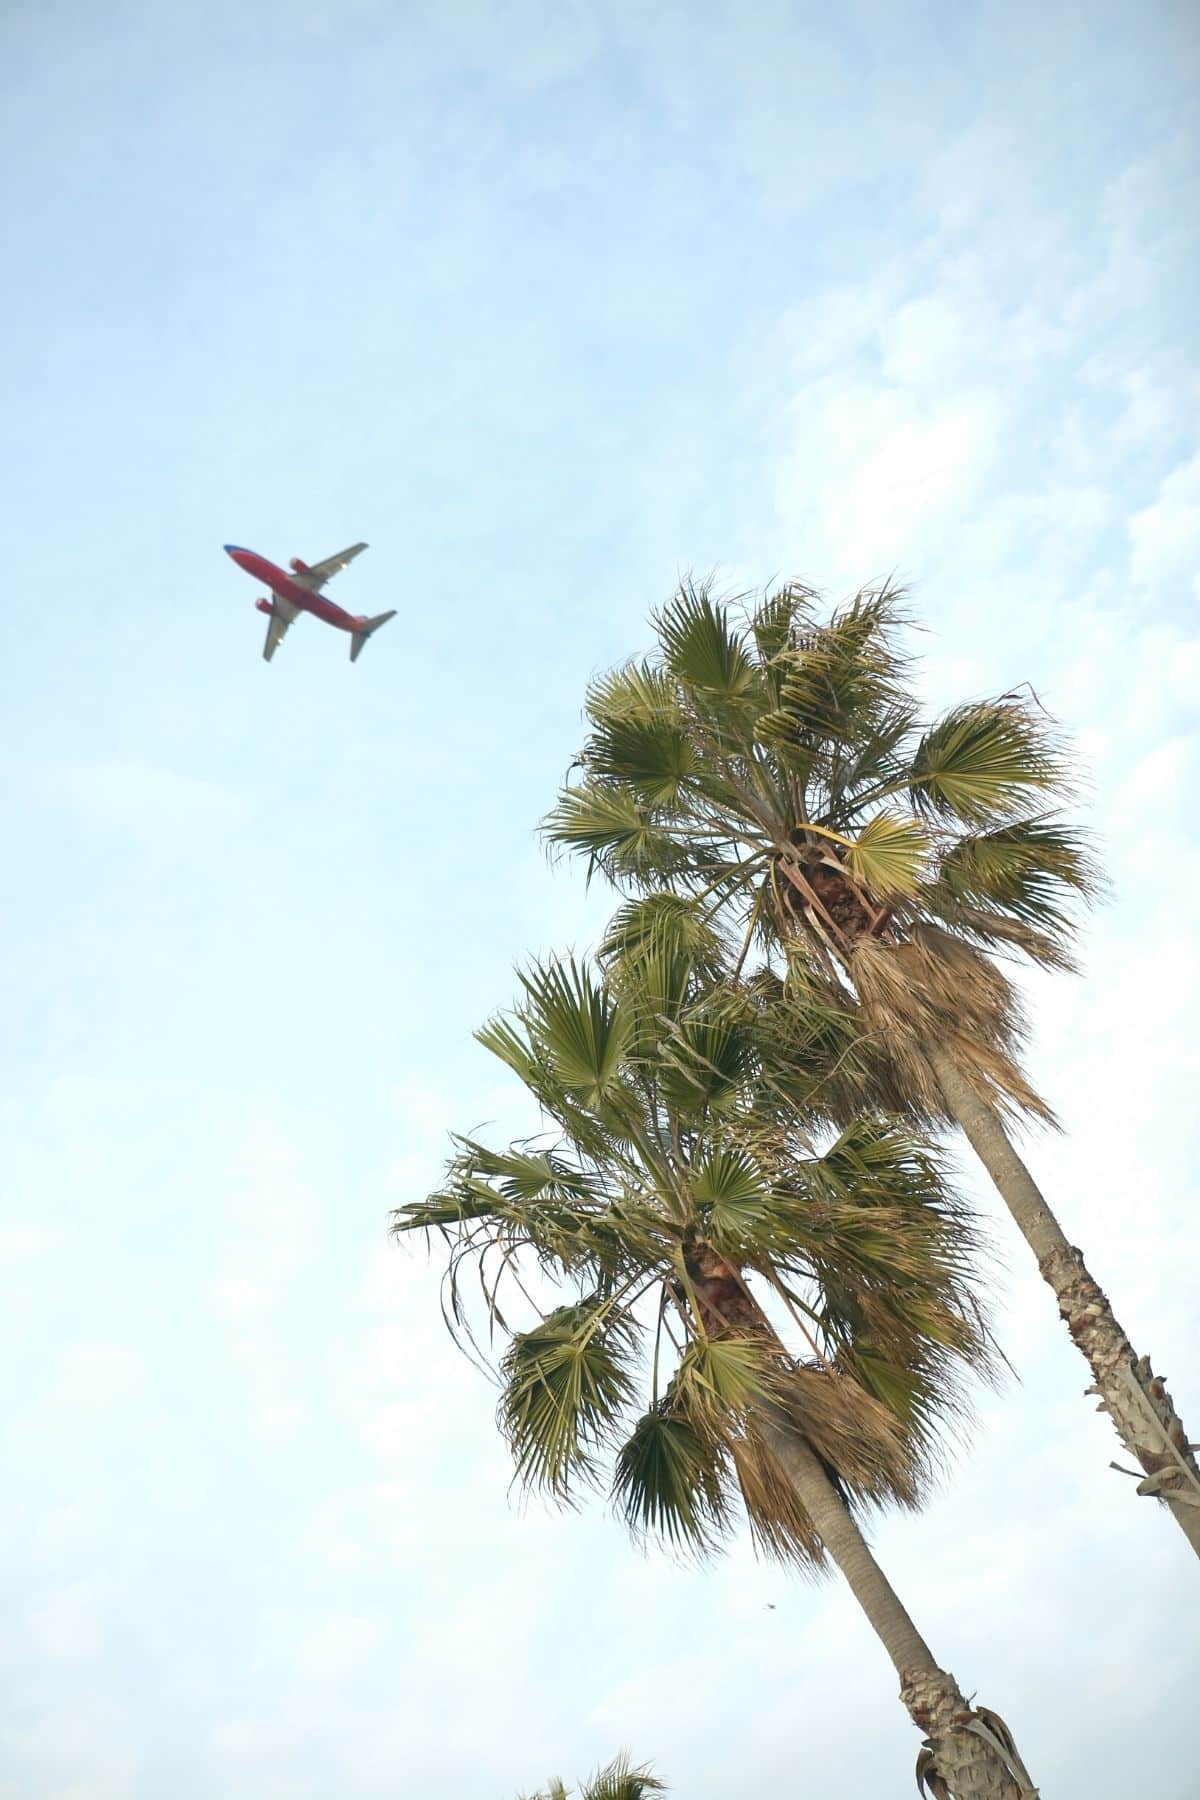 airplane flying over palm trees.